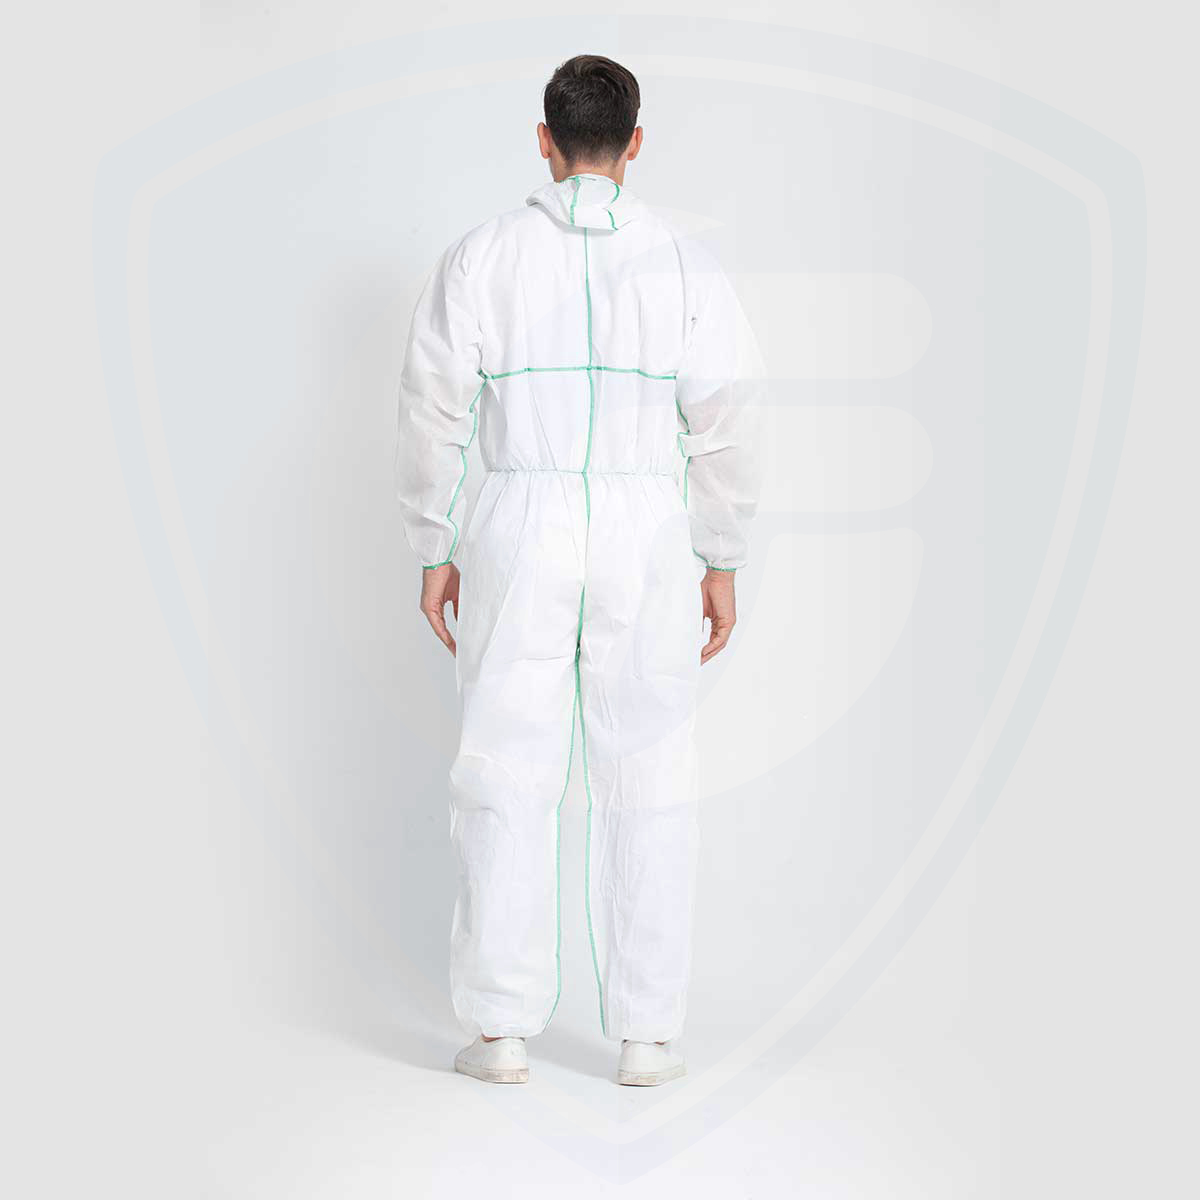 White Breathable Disposable Coverall/overall Protective Suit with Hood 